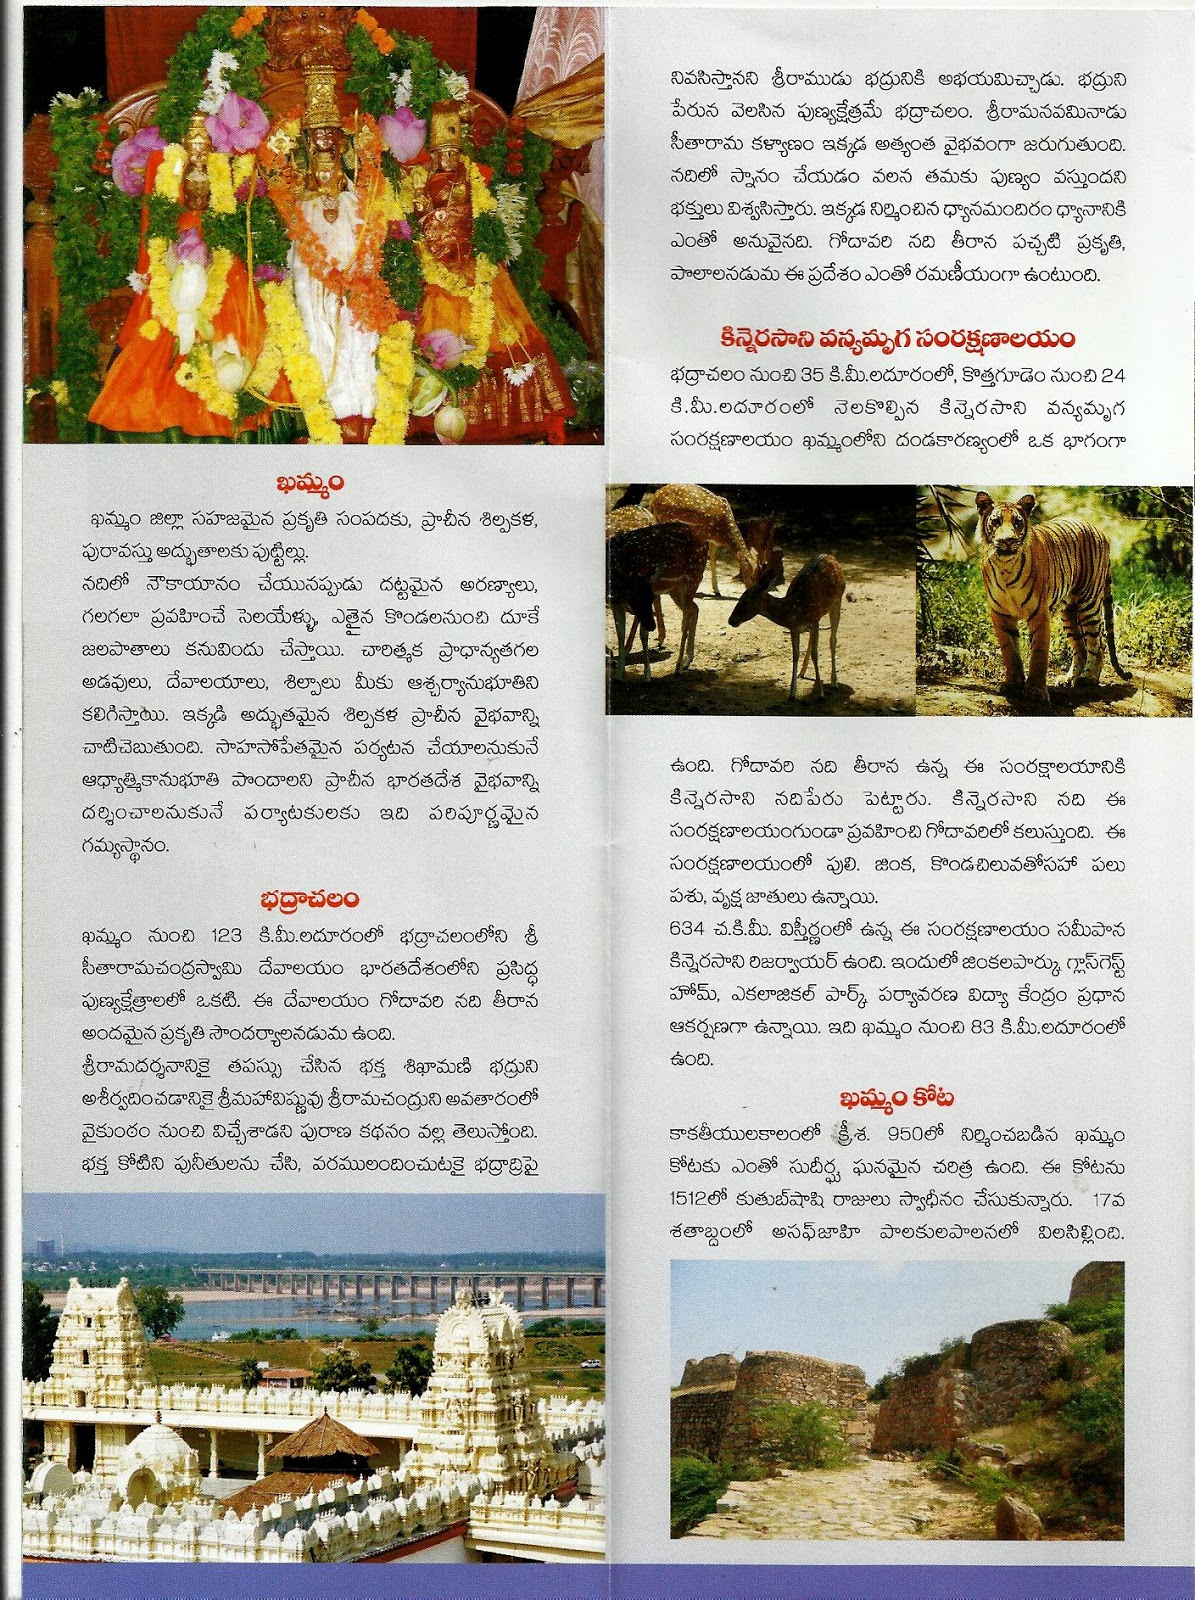 tourist meaning in telugu